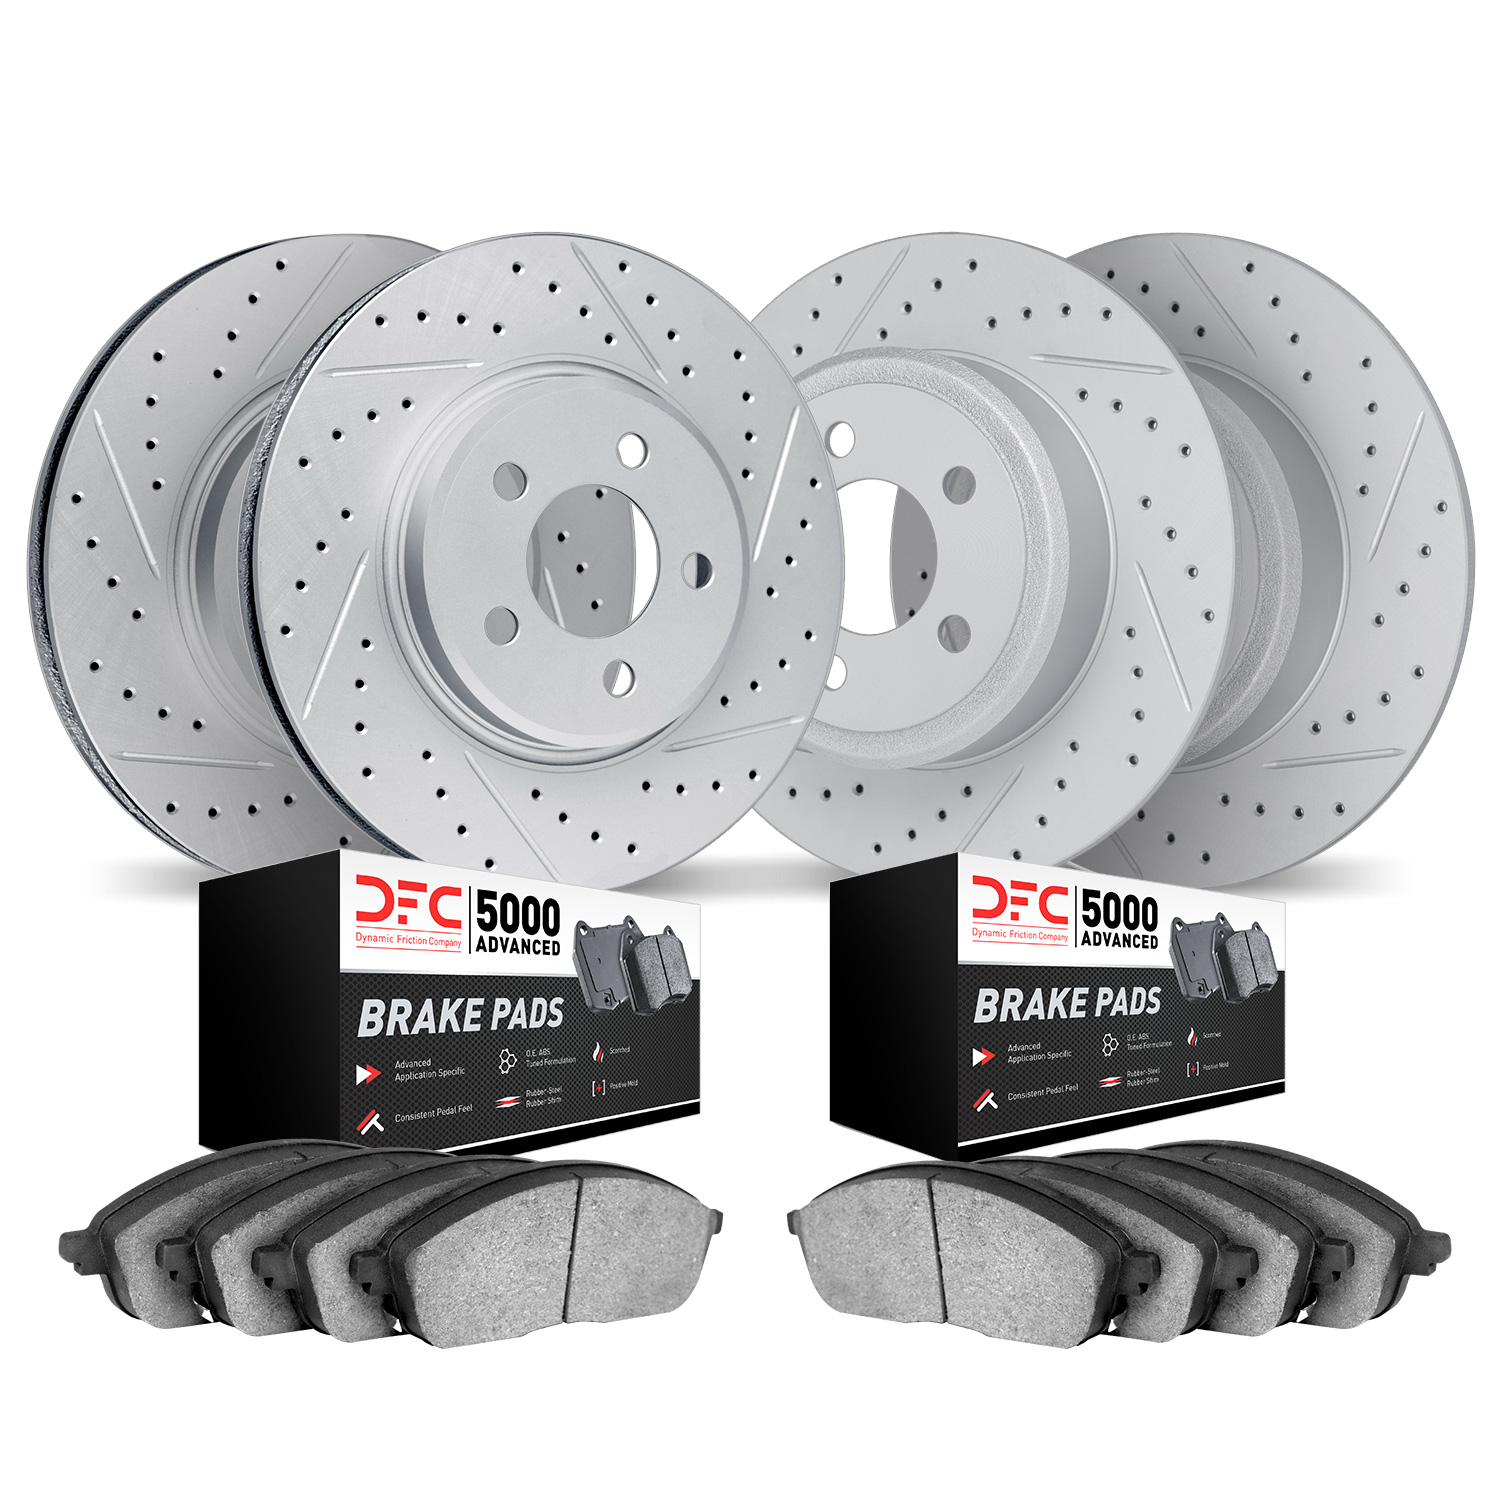 2504-54312 Geoperformance Drilled/Slotted Rotors w/5000 Advanced Brake Pads Kit, 2017-2020 Ford/Lincoln/Mercury/Mazda, Position: